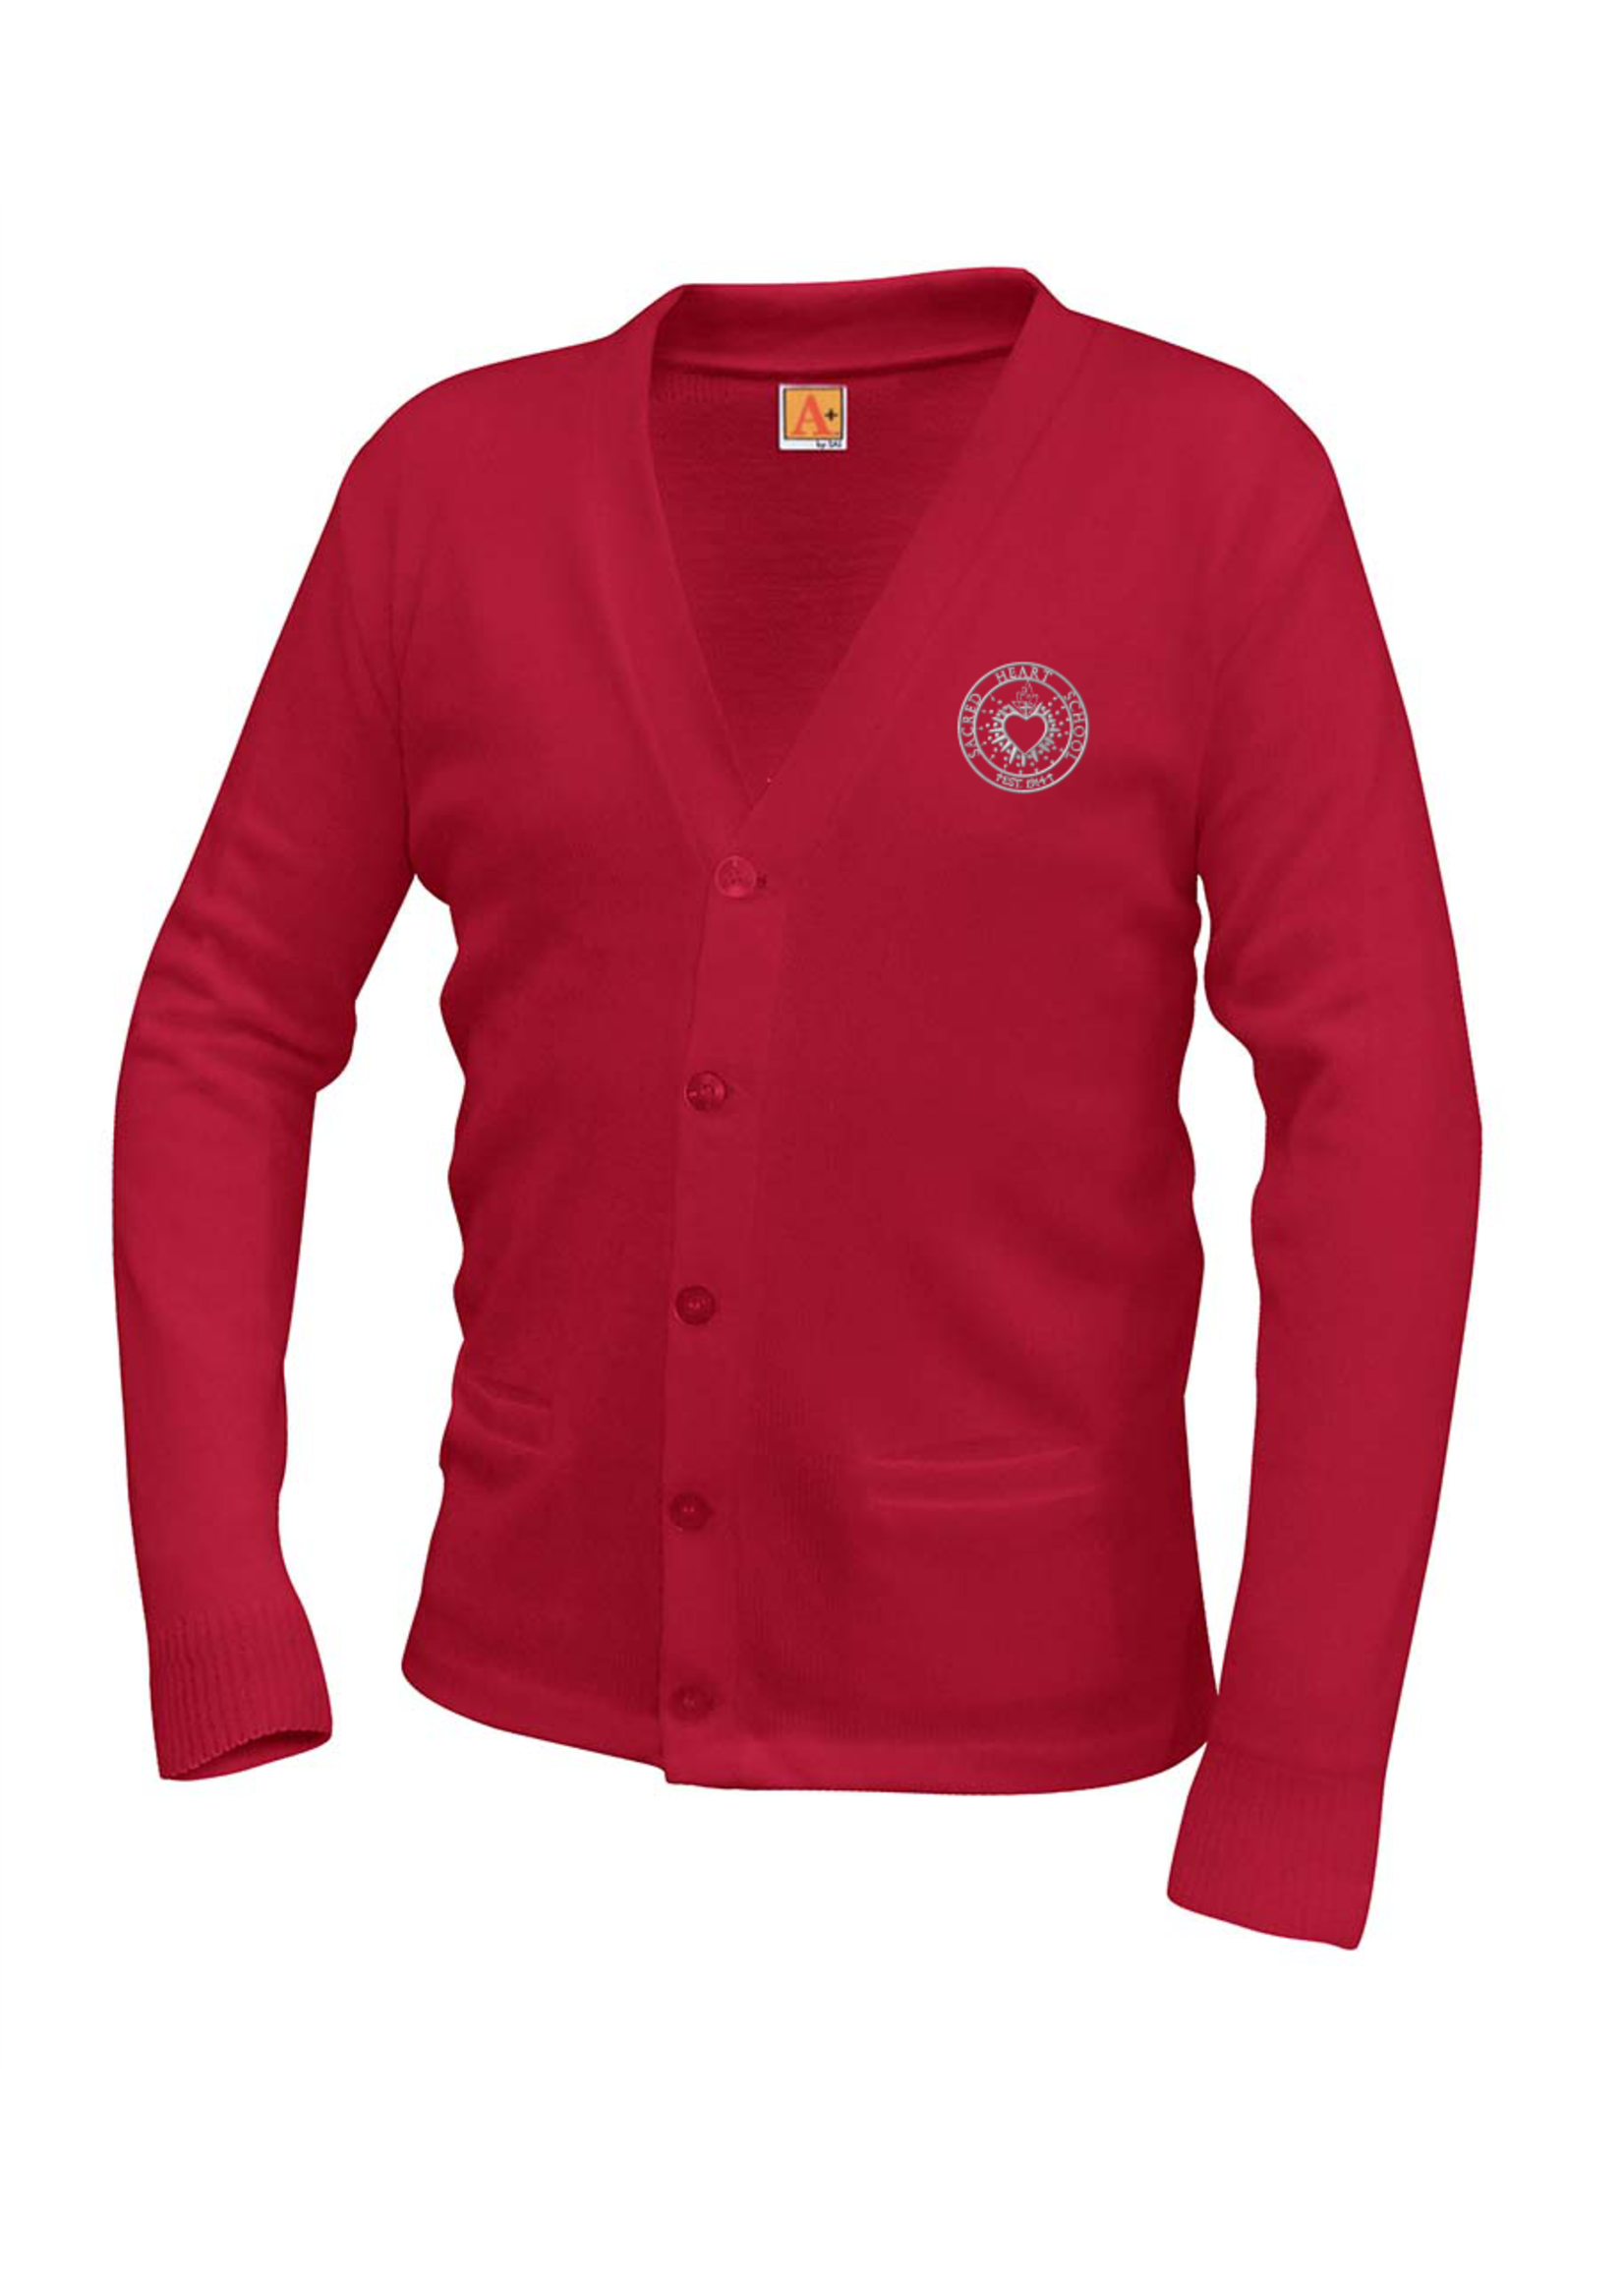 SHS Red V-neck cardigan sweater with pockets